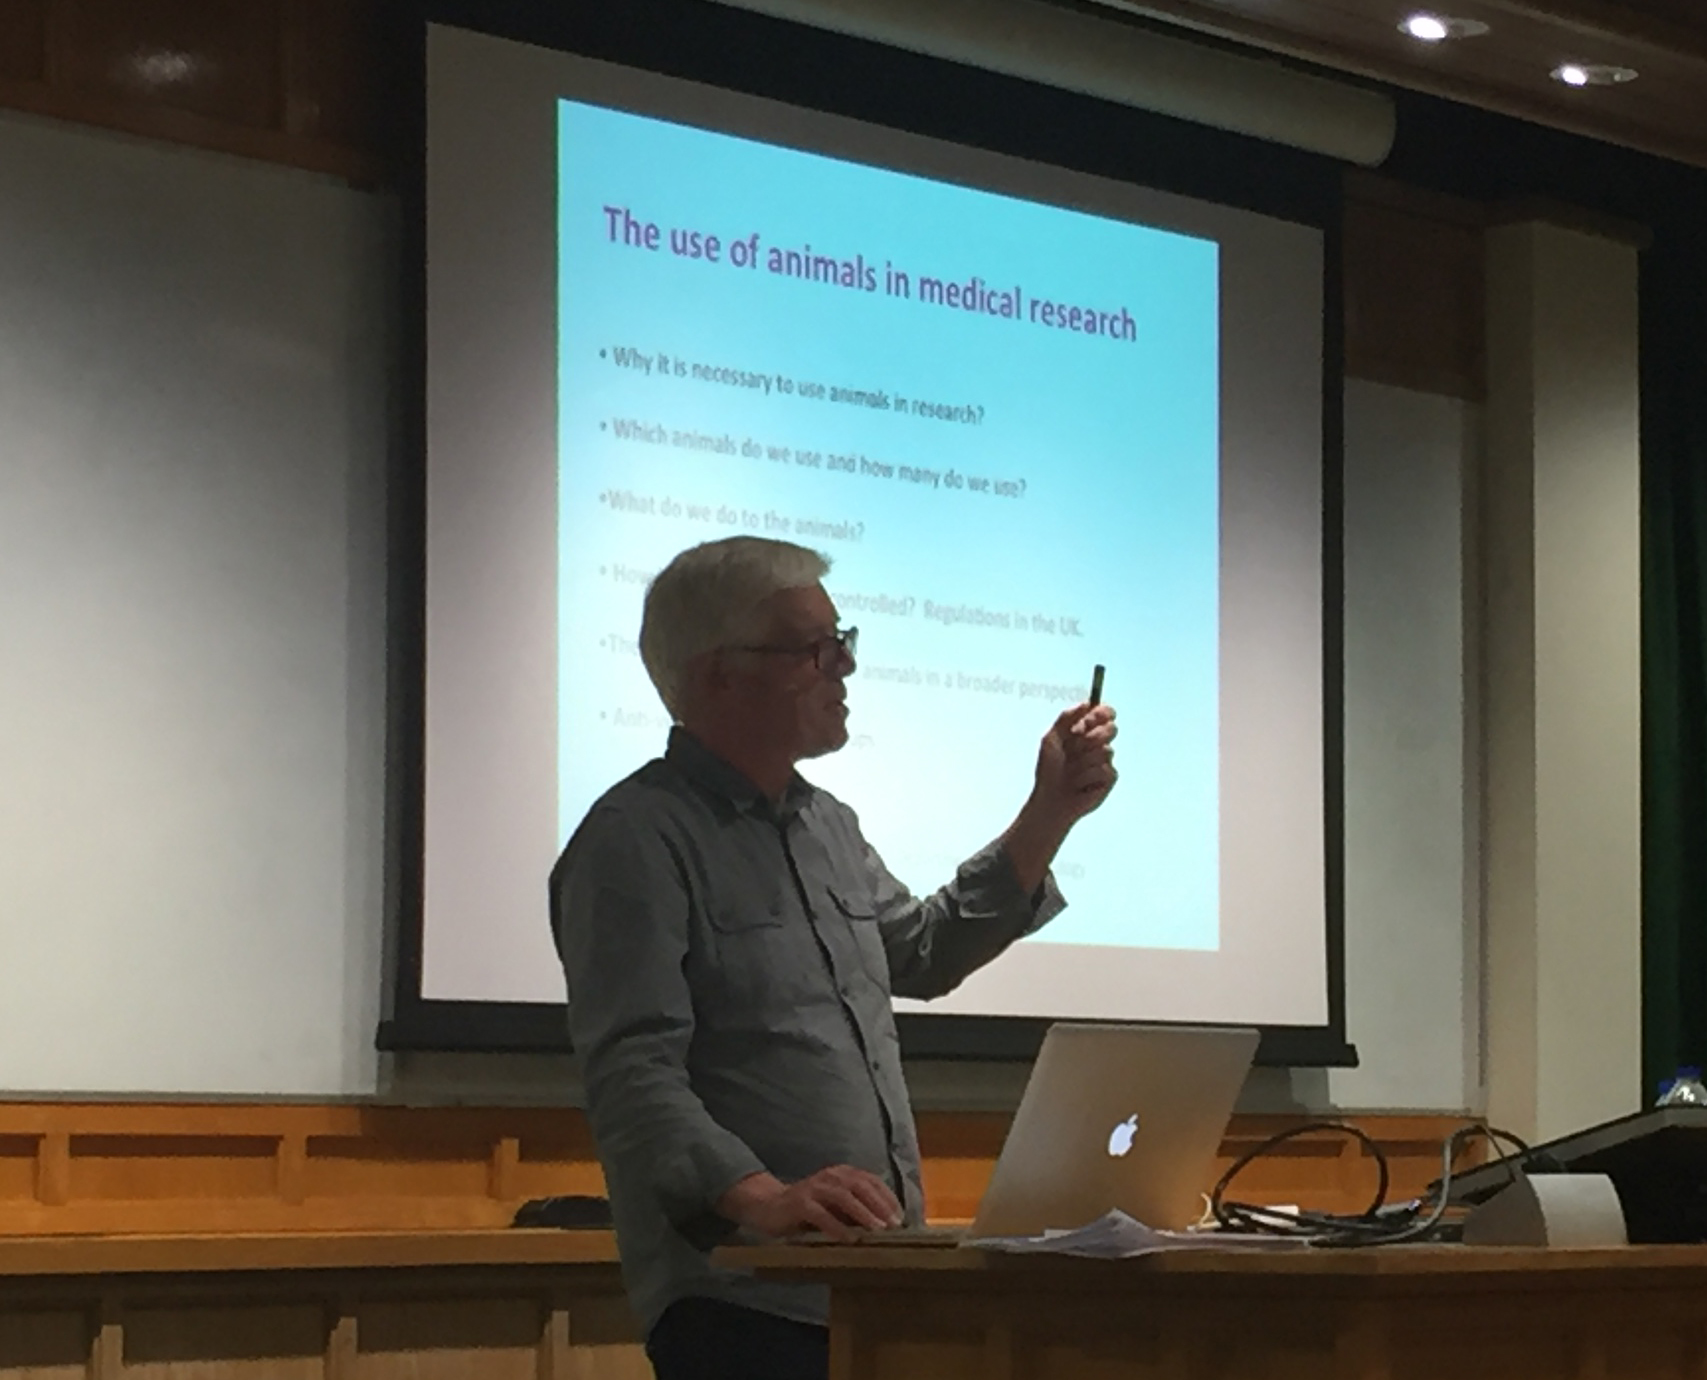 Associate Unit Member Professor Paul Bolam leads a discussion on the use of animals in research.